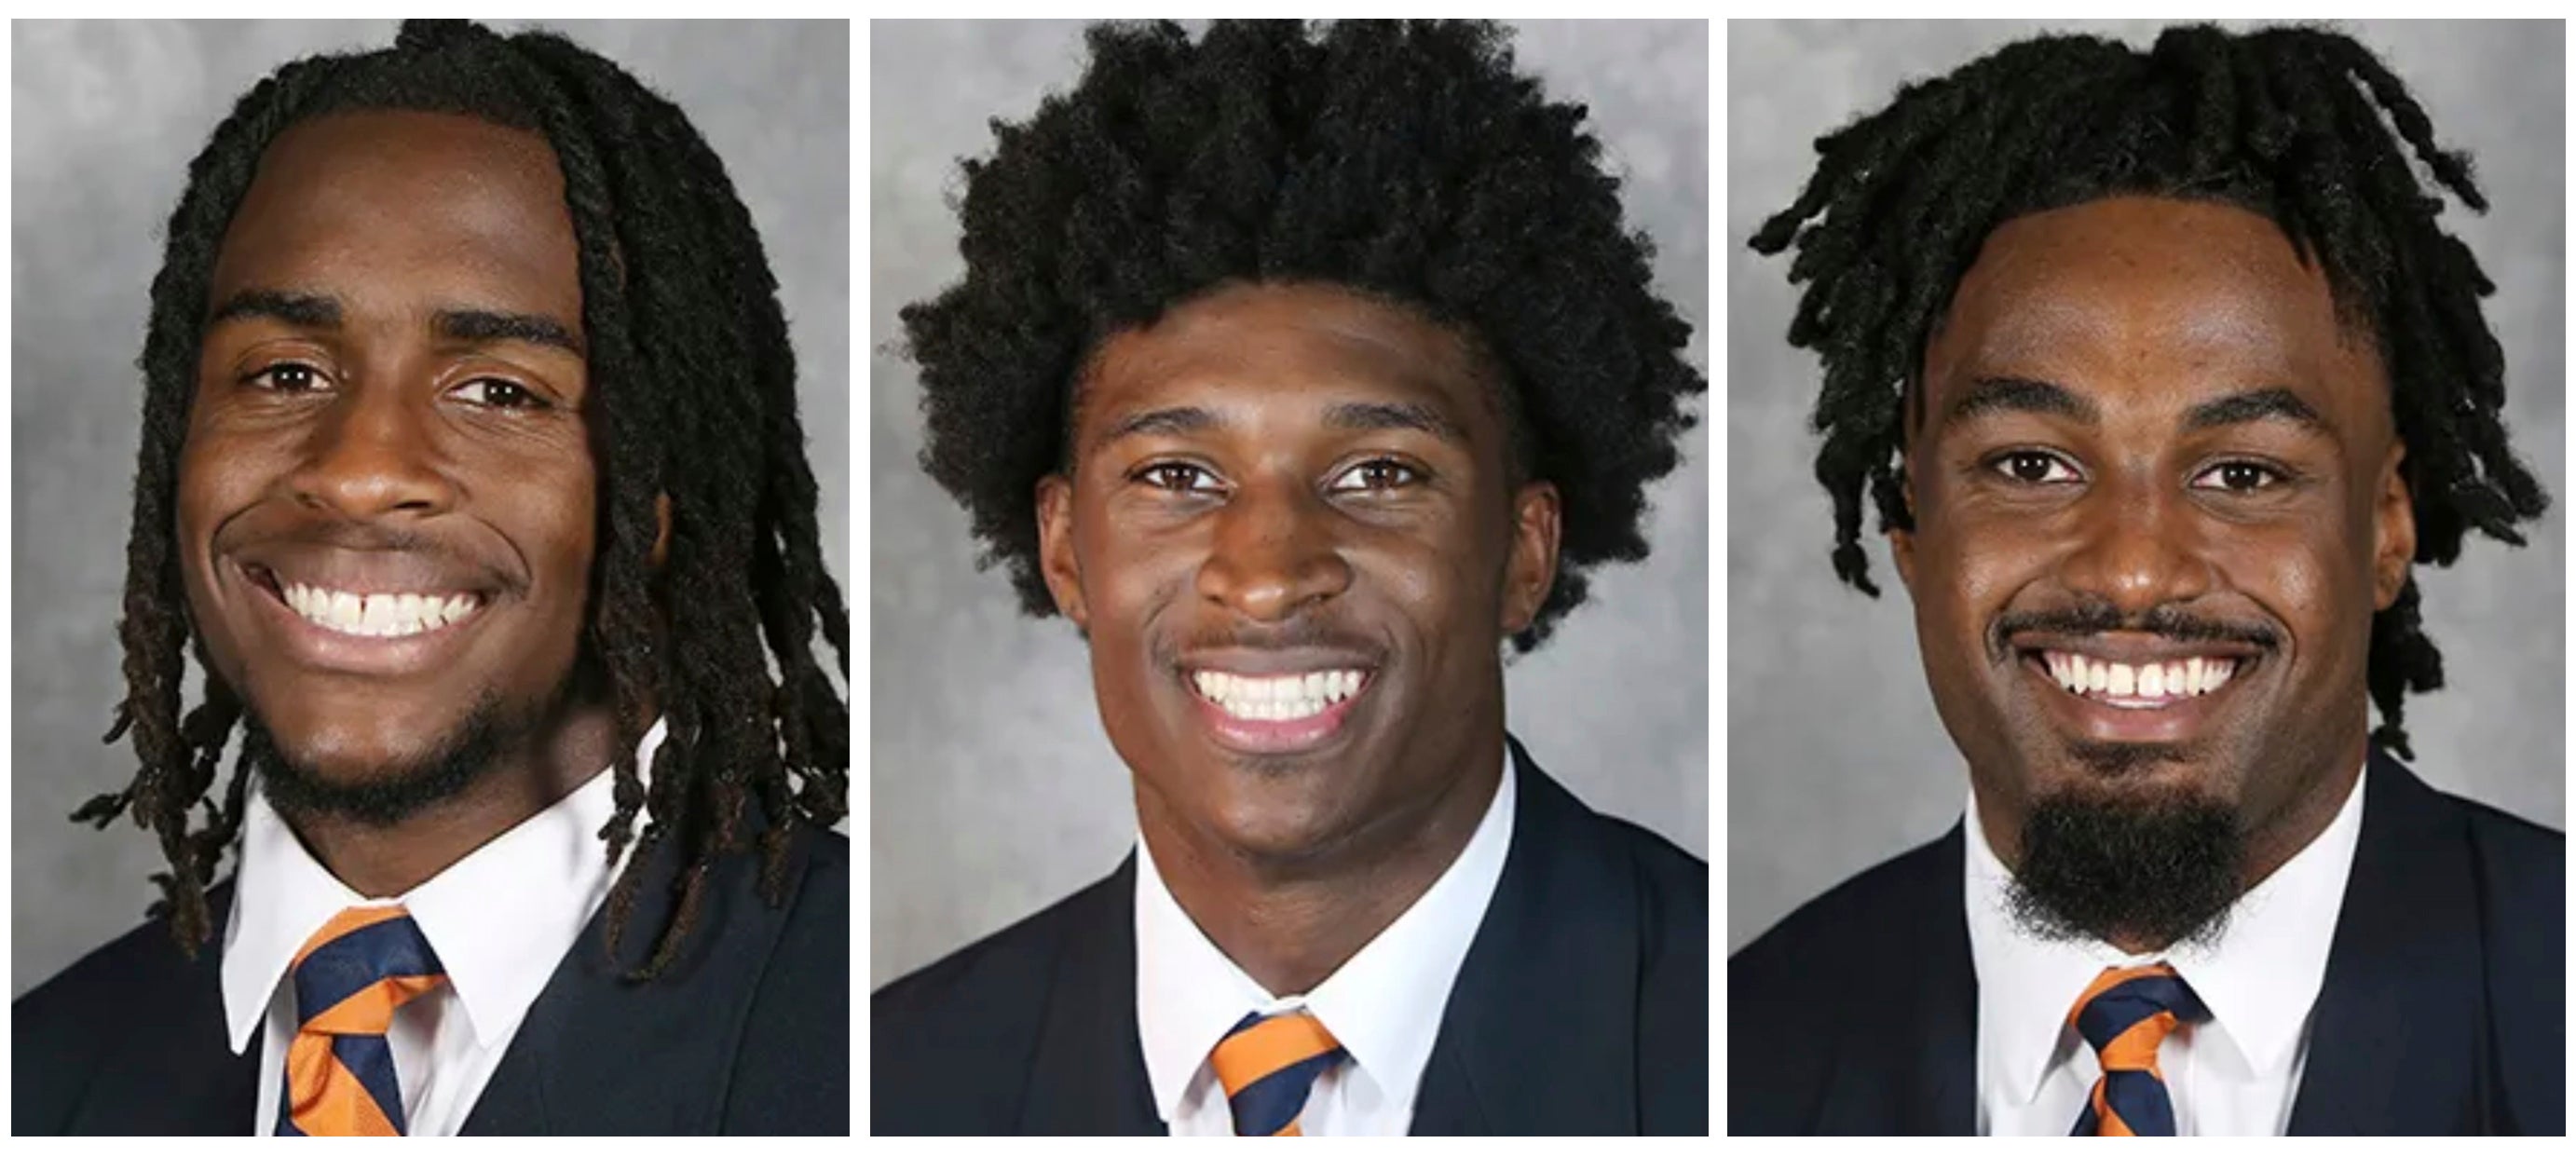 Linebacker D’Sean Perry, Lavel Davis Jr, and Devin Chandler were the fatal victims in the shooting